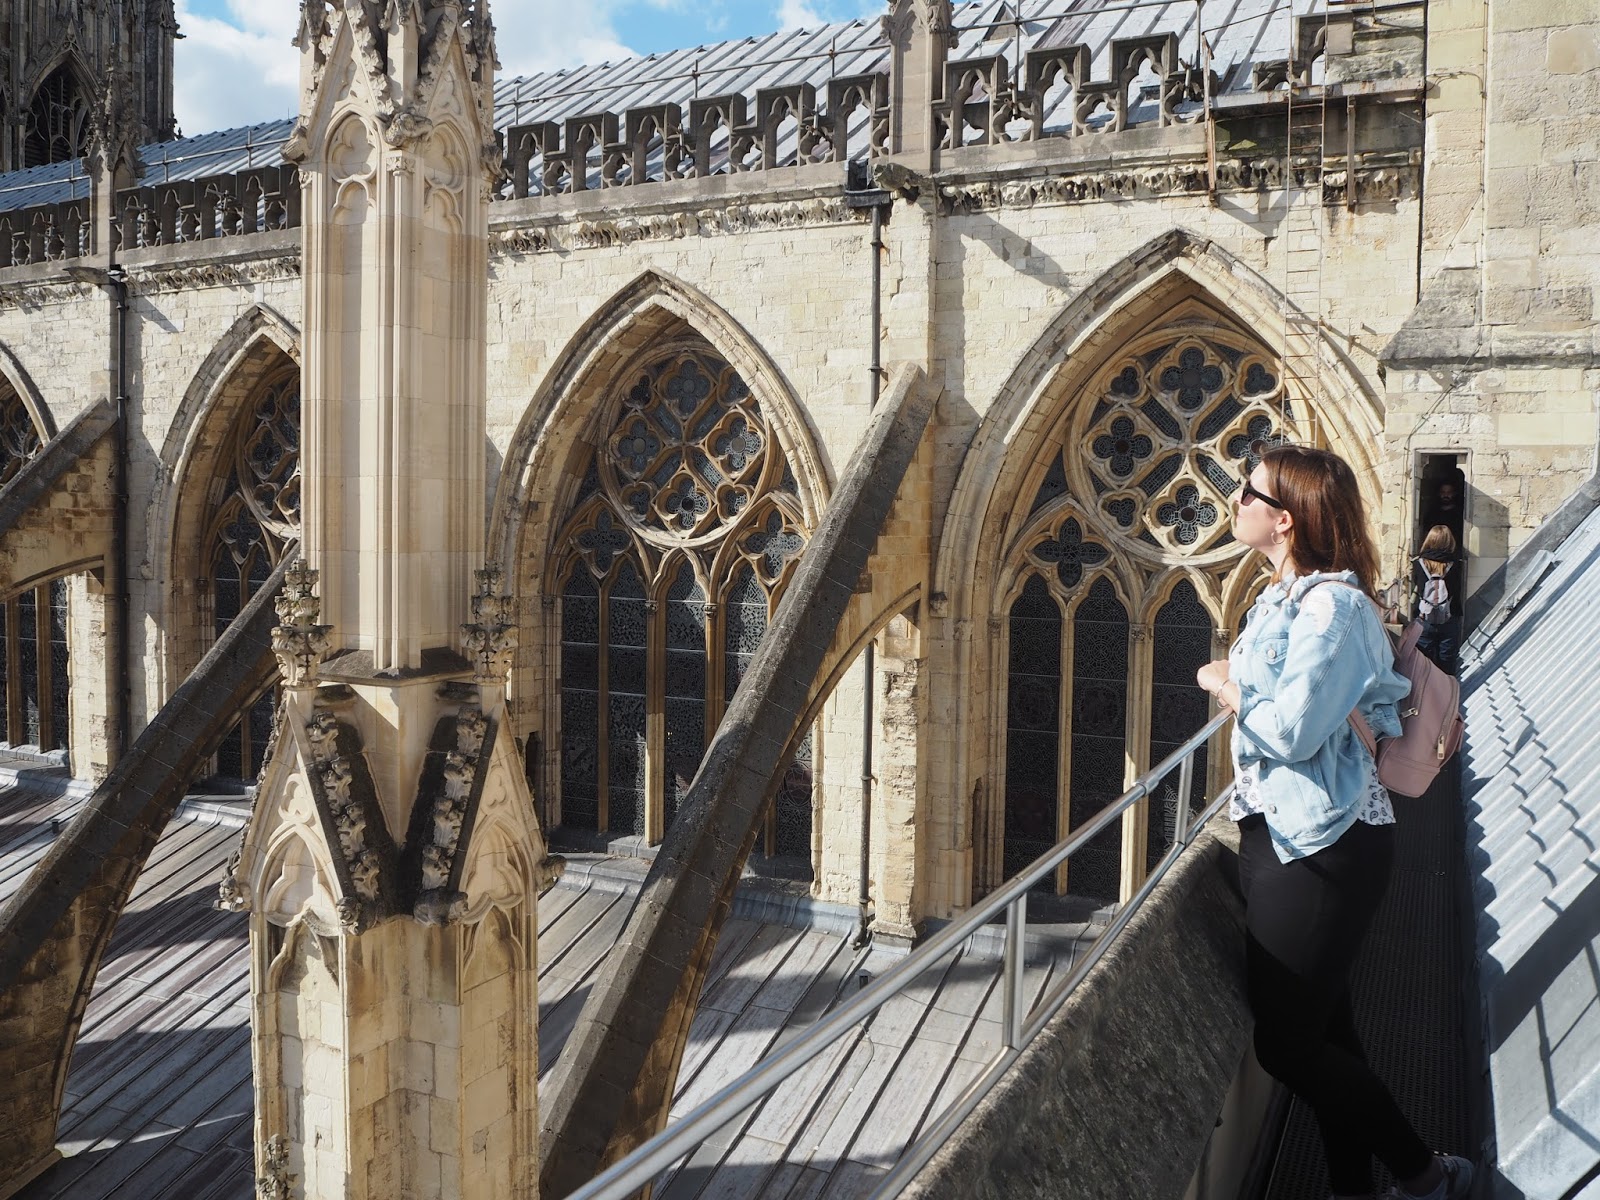 How to spend a day in York